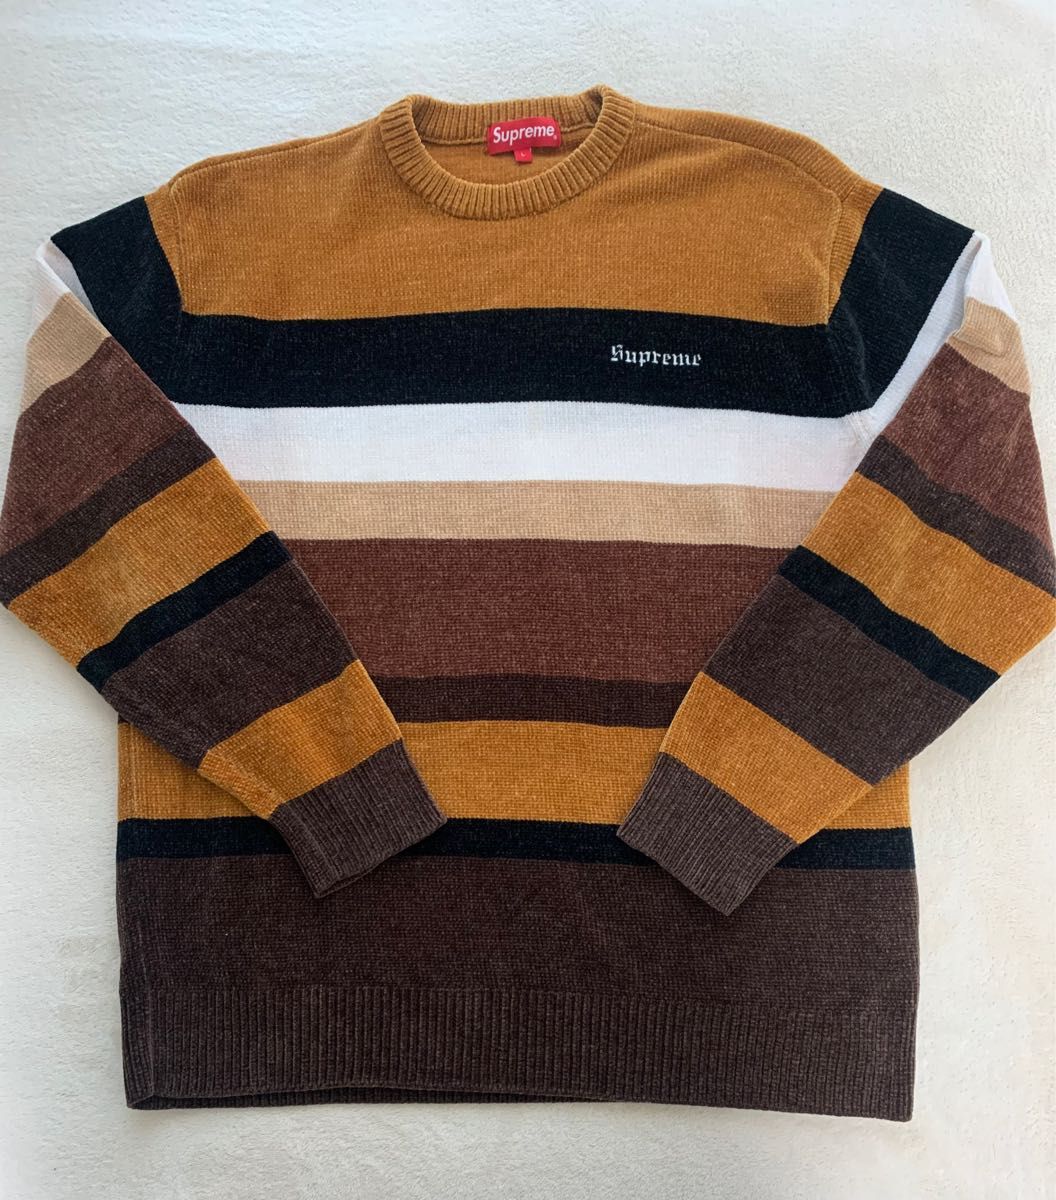 Supreme AW Chenille Sweater｜PayPayフリマ